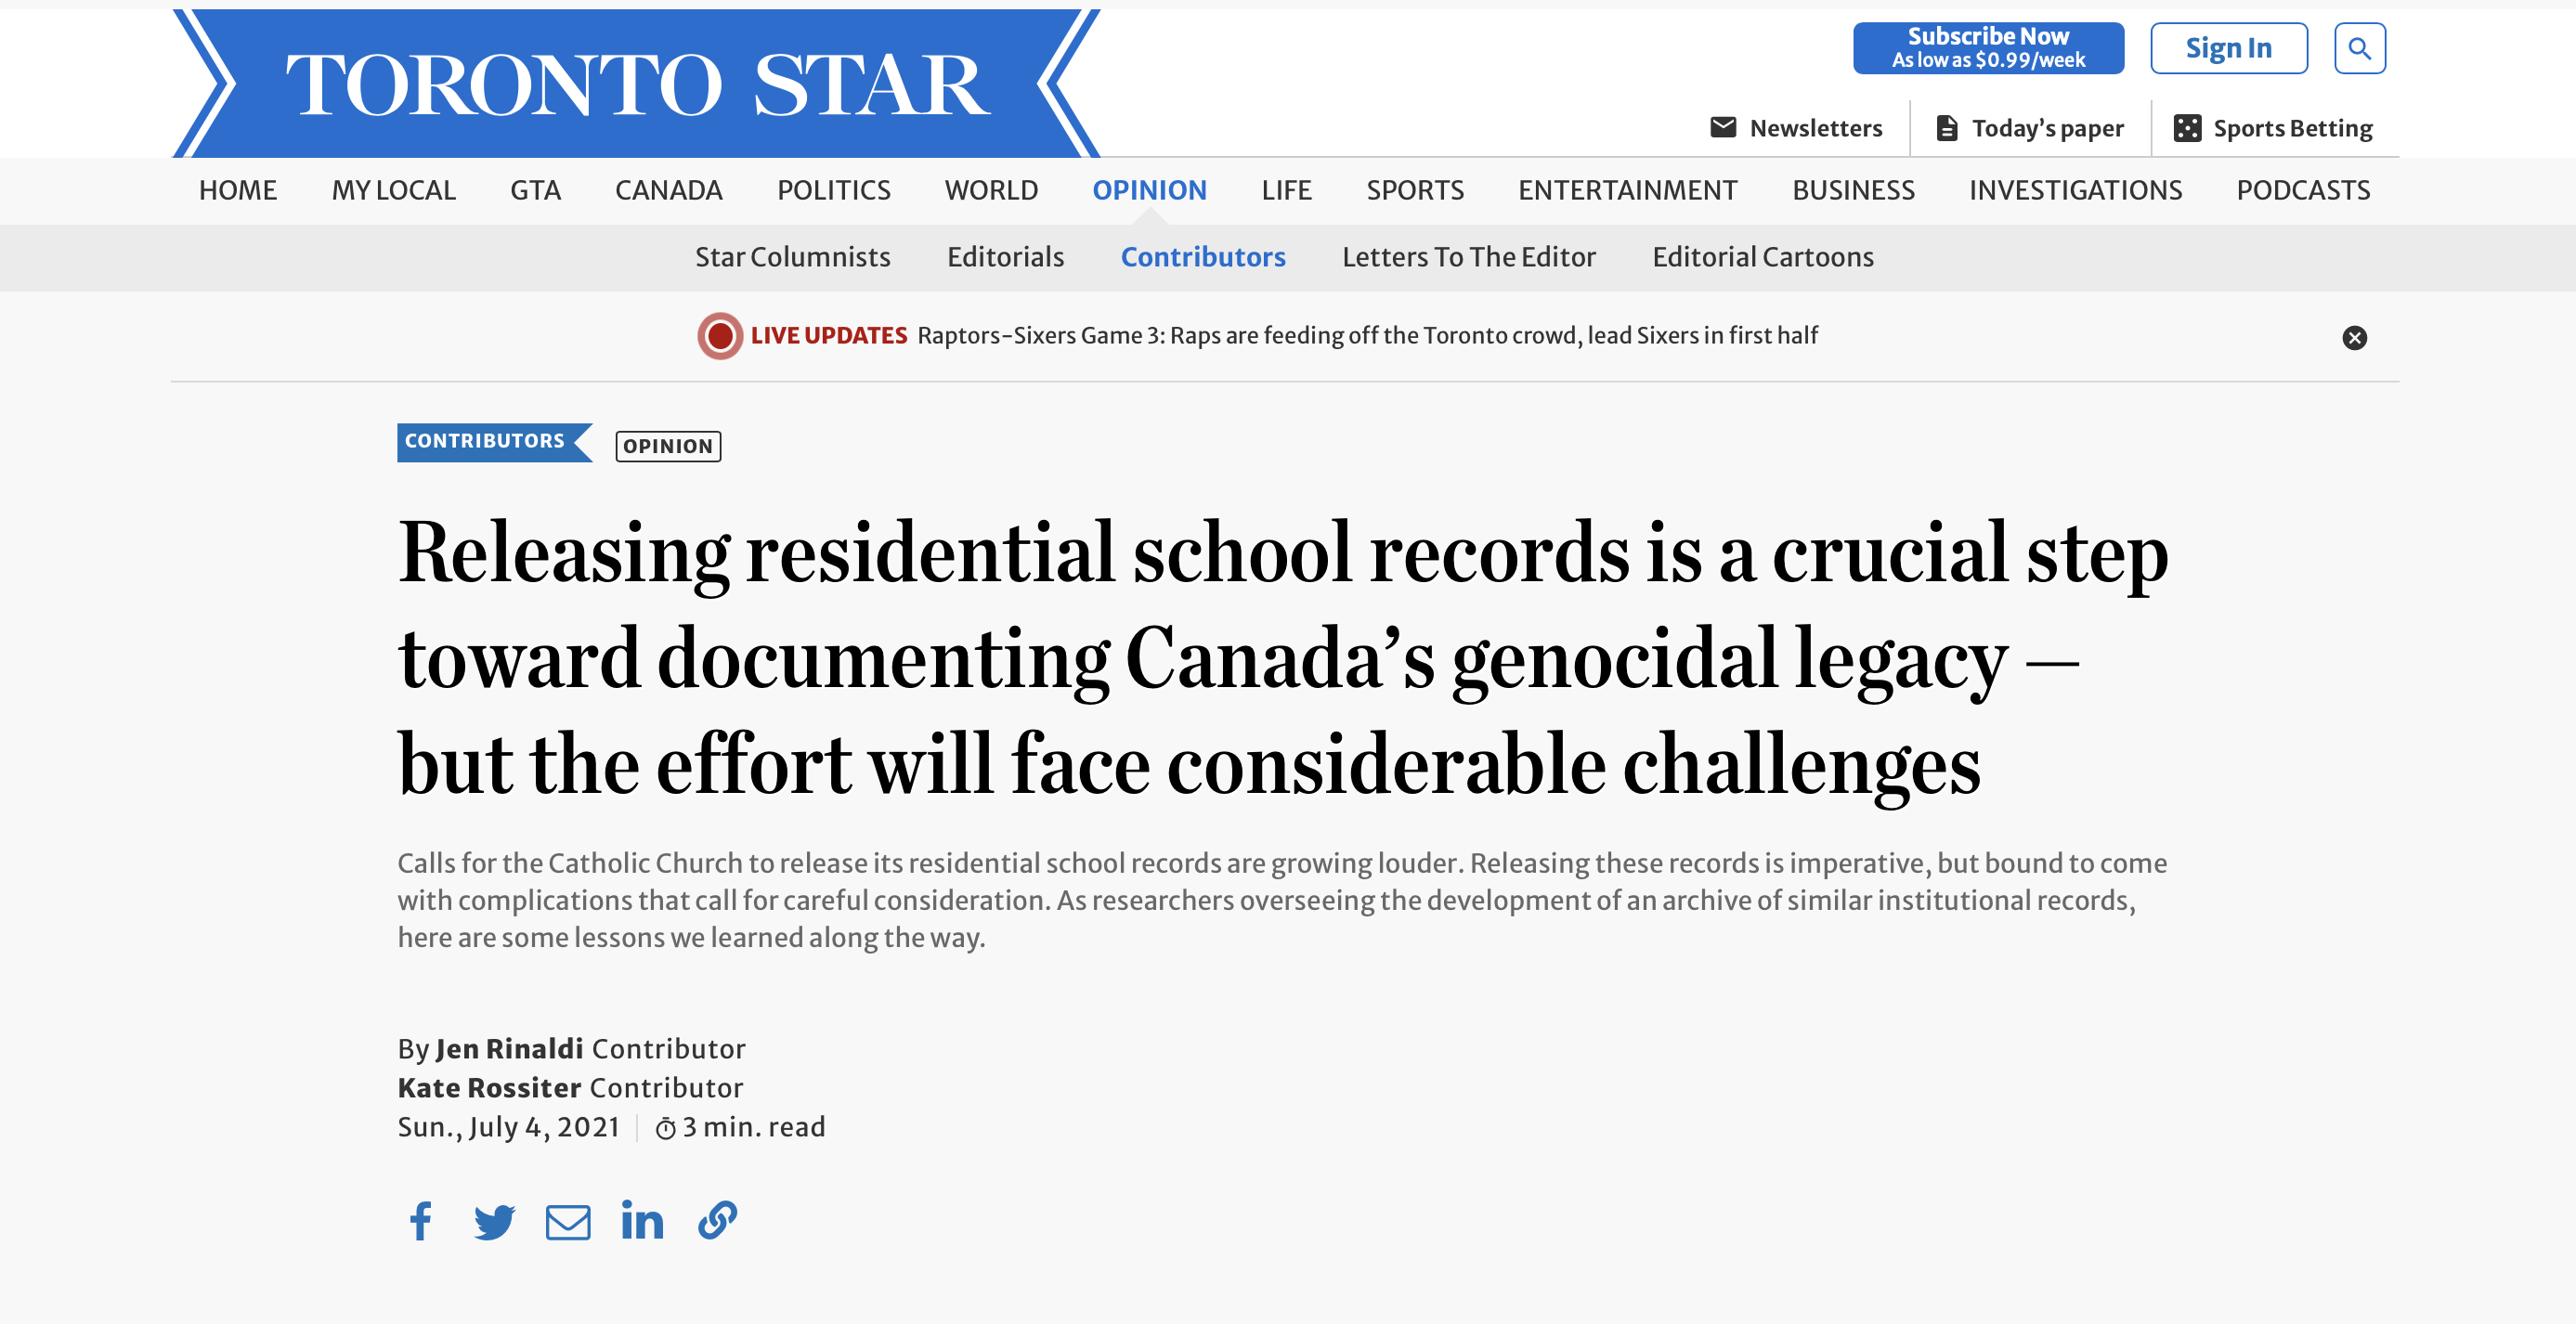 Releasing Residential School Records is a Crucial Step